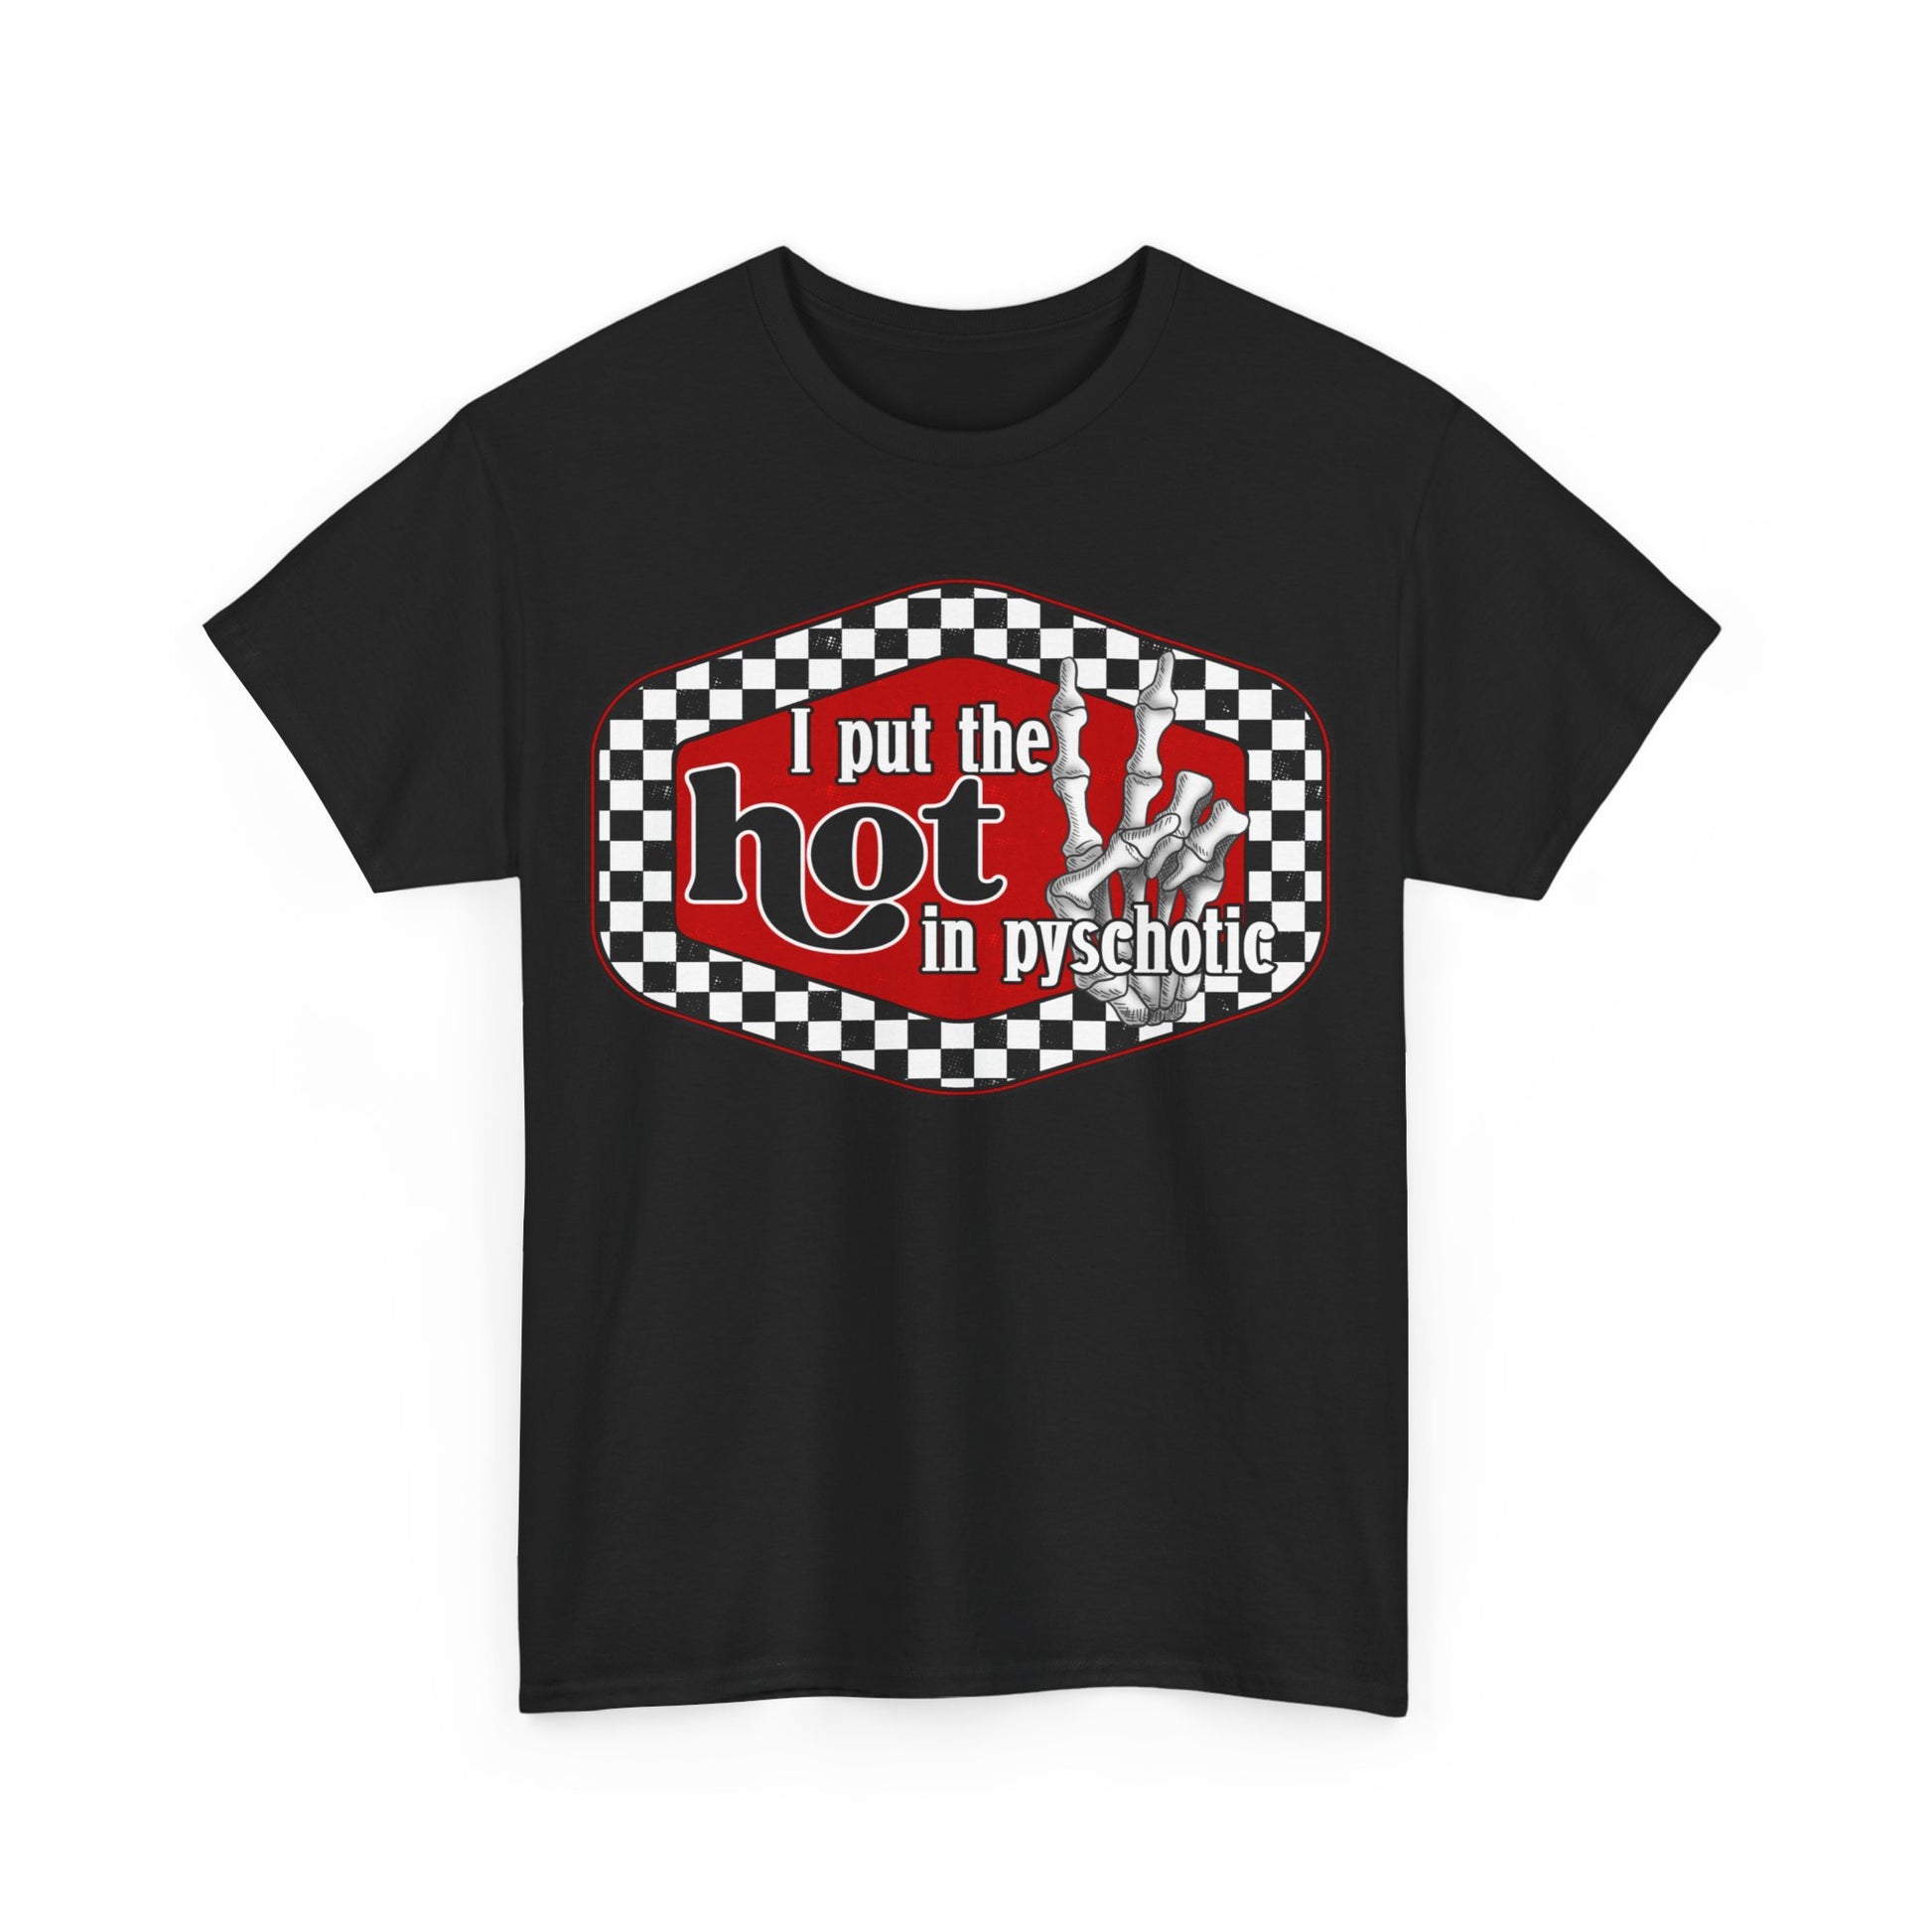 I put the hot in psychotic,Quirky Tee, Trendy T-Shirt,Racing Check Fashion